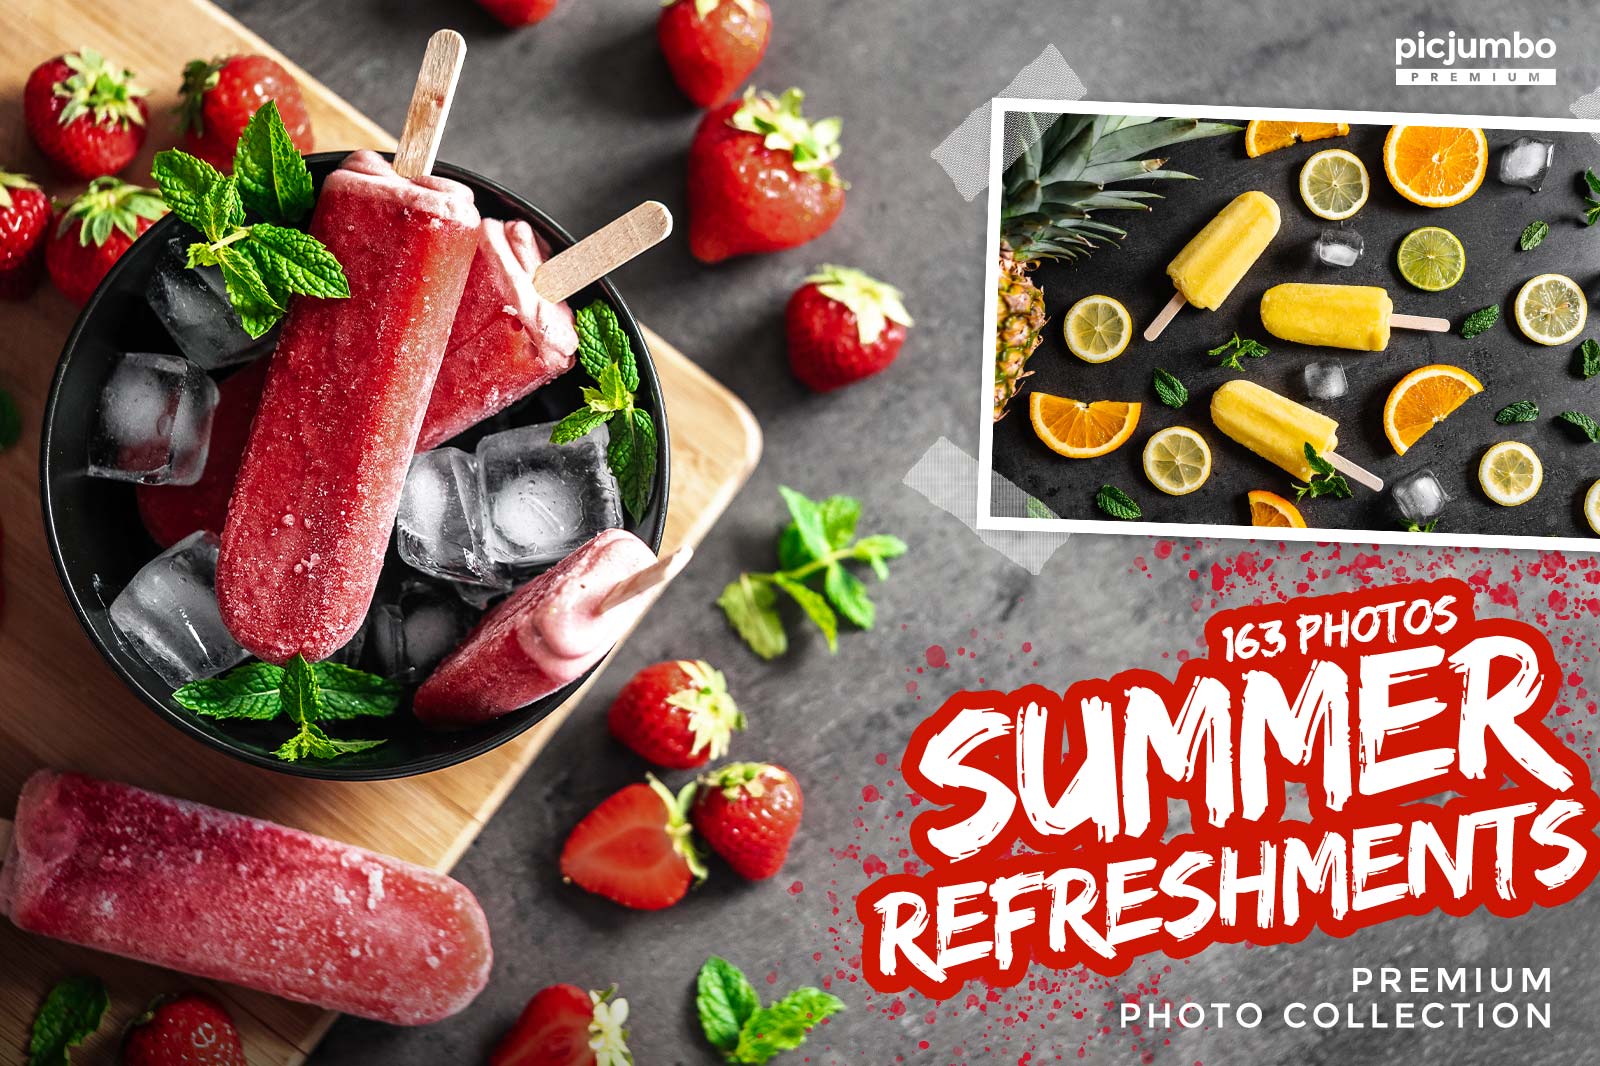 Summer Refreshments Stock Photo Collection